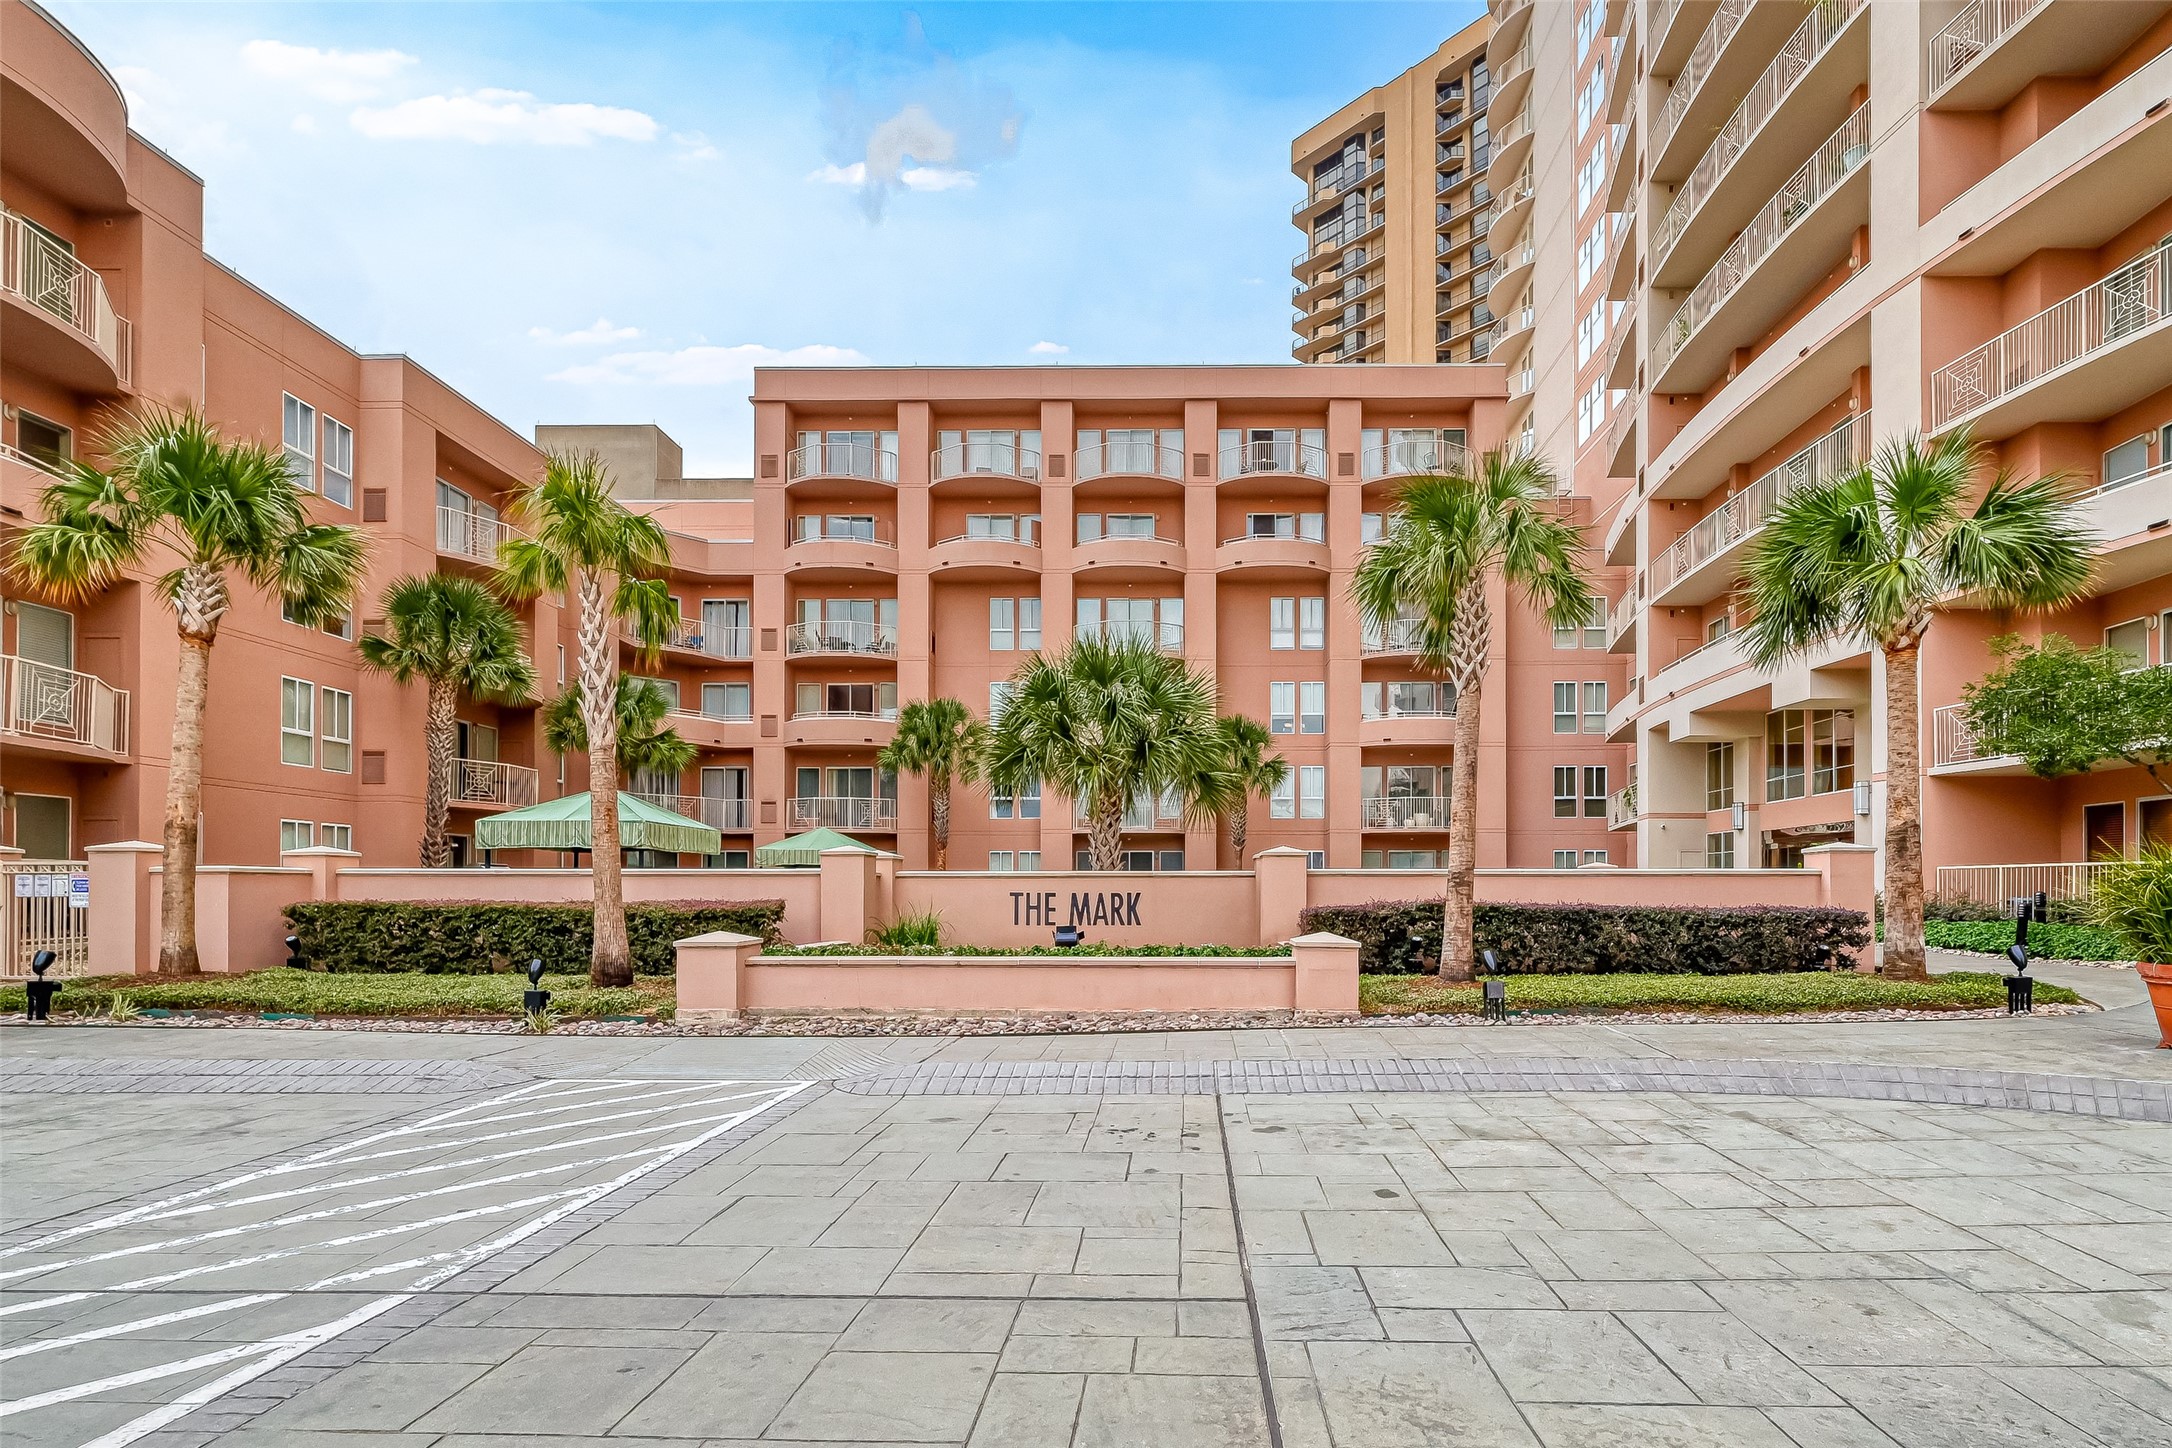 Great amenities and resort style living in the heart of Galleria area.